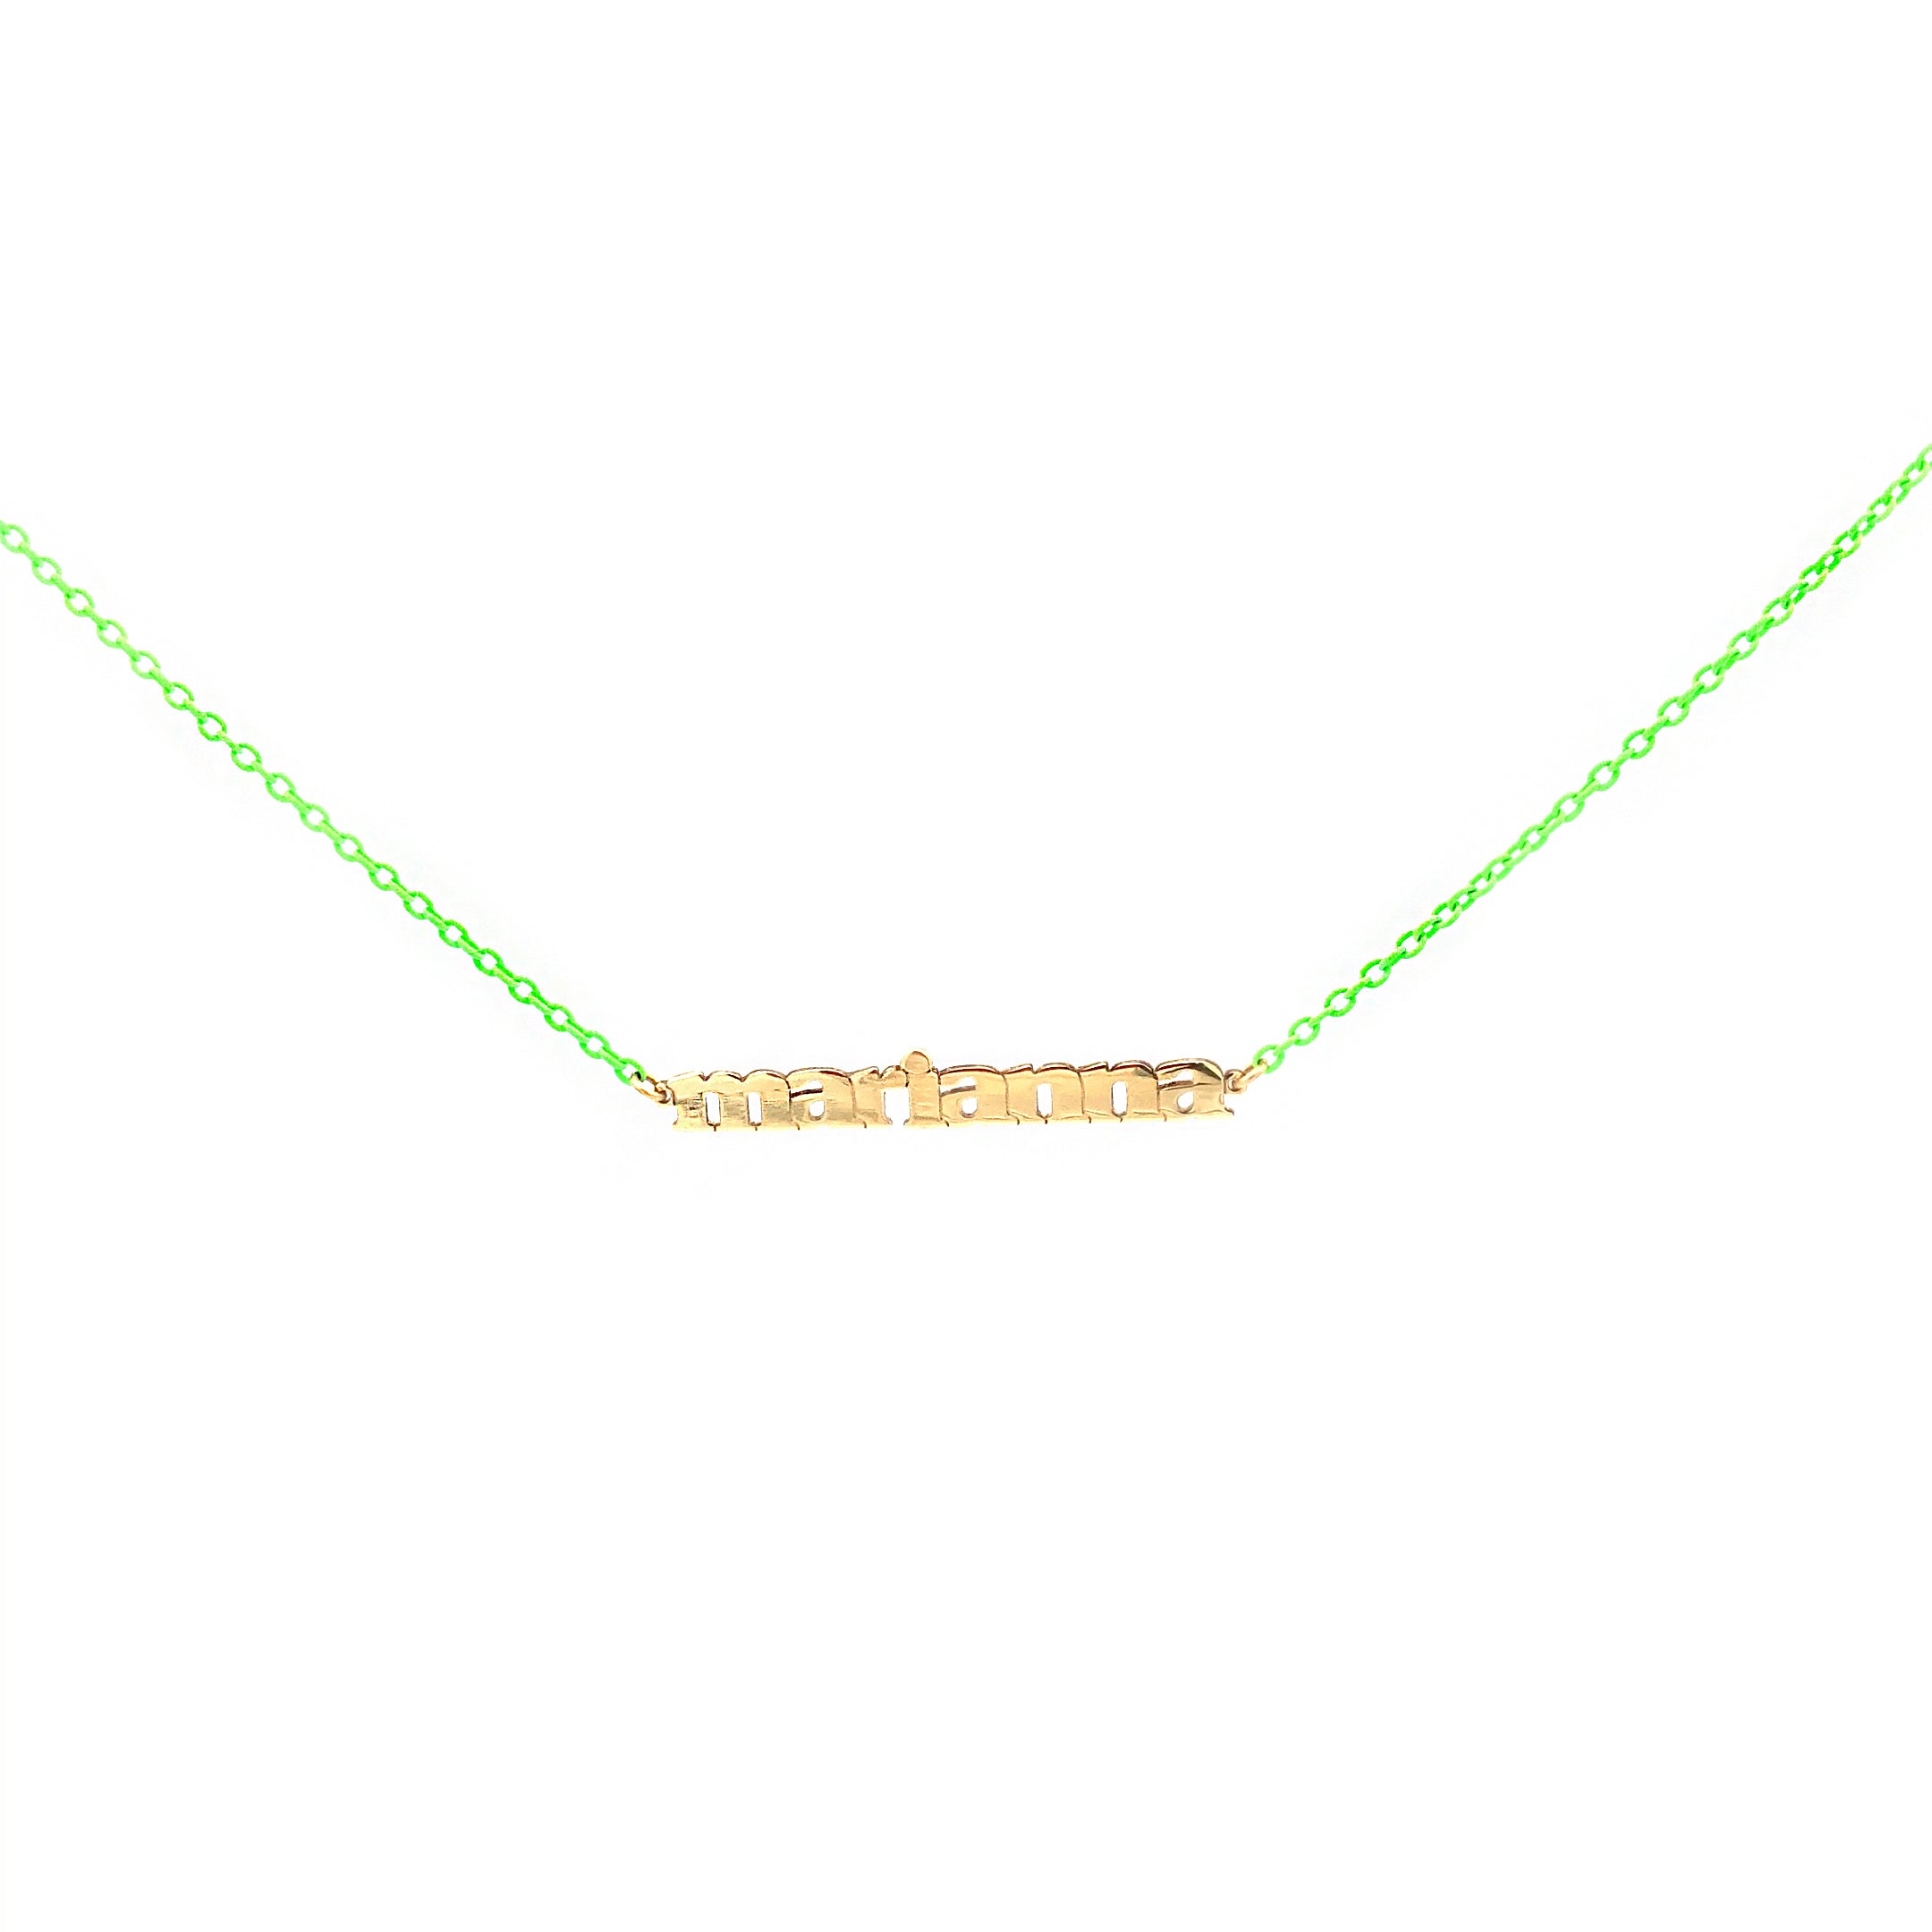 Chokers - Customizable Golden Mate choker colored chain – ORO18KT - 6 | Rue des Mille